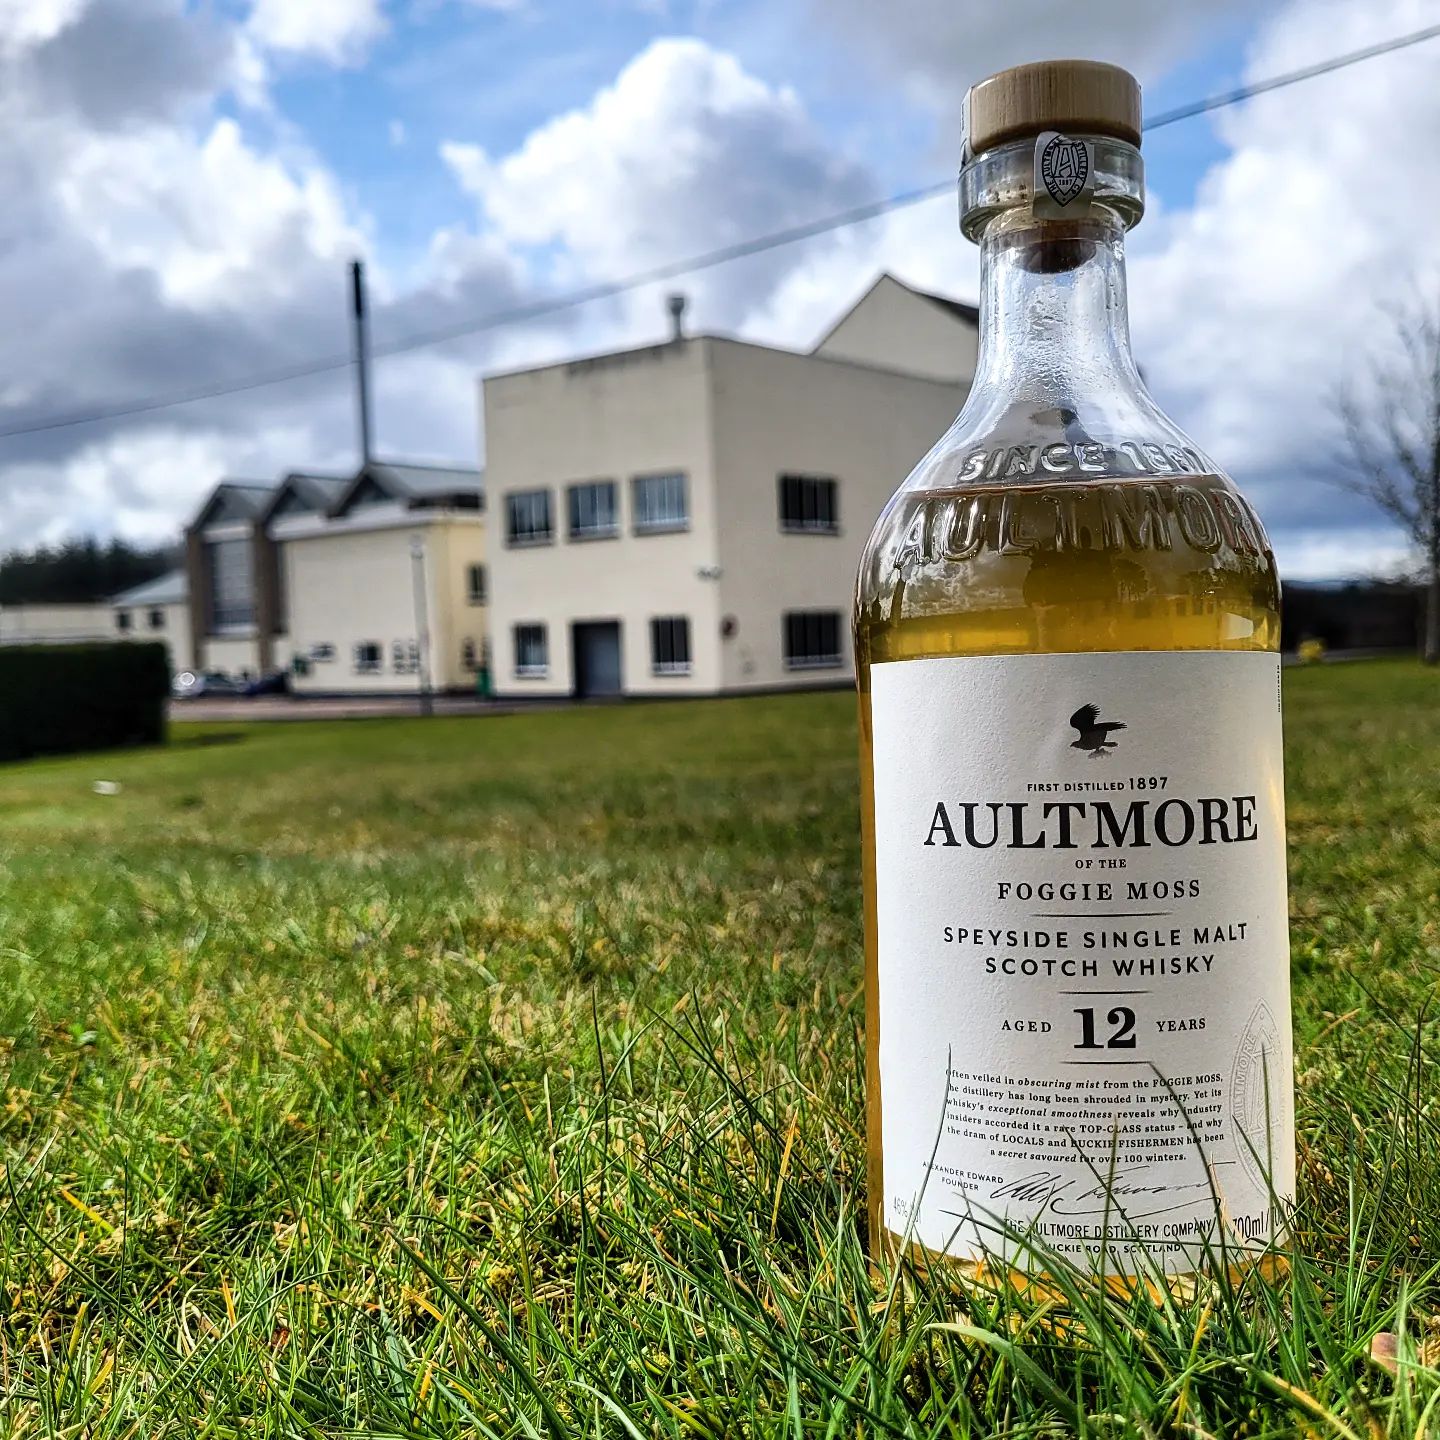 Aultmore whisky